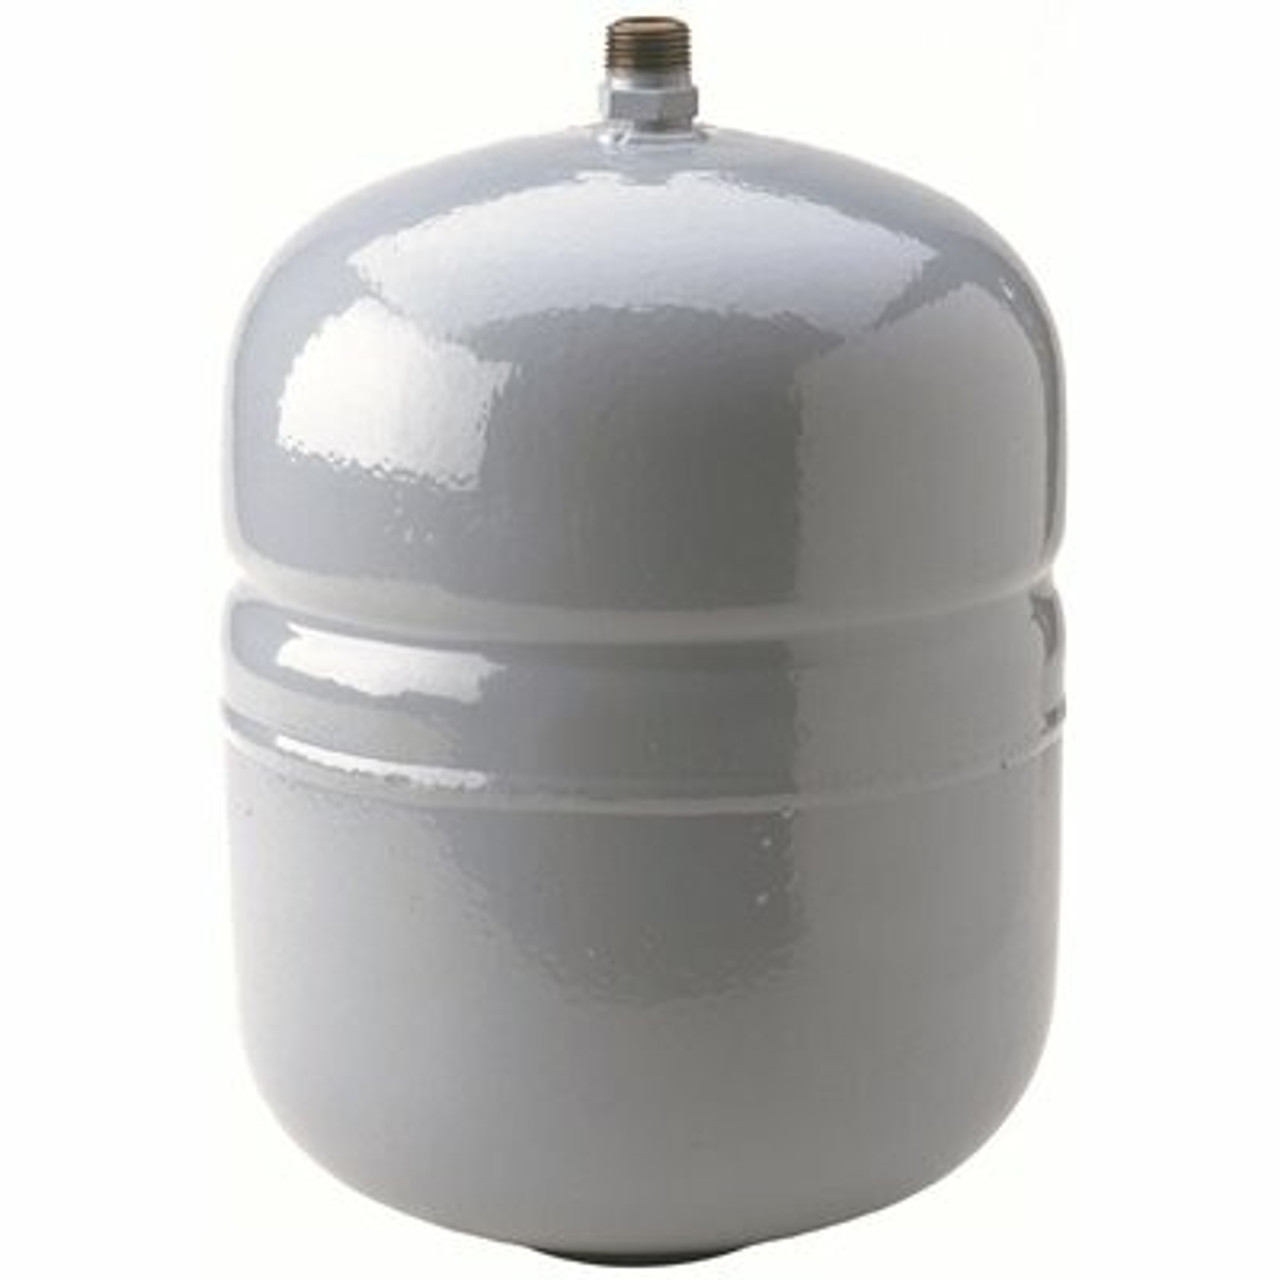 Zurn-Wilkins 18 L Lead-Free Potable Water Thermal Expansion Tank